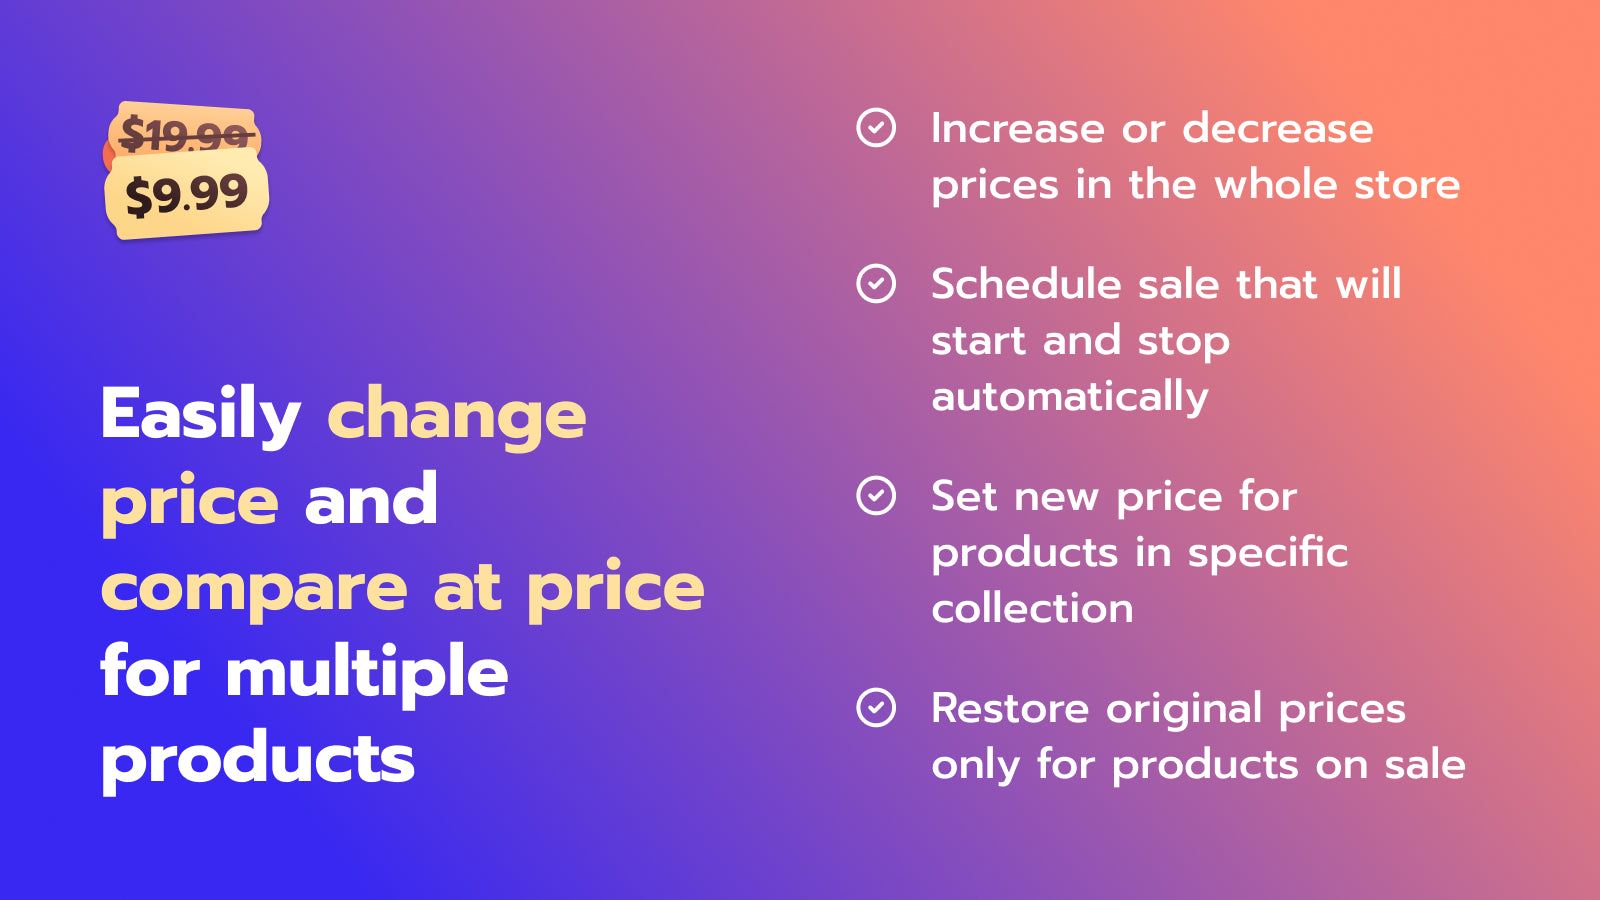 Easily change price and compare at price for multiple products